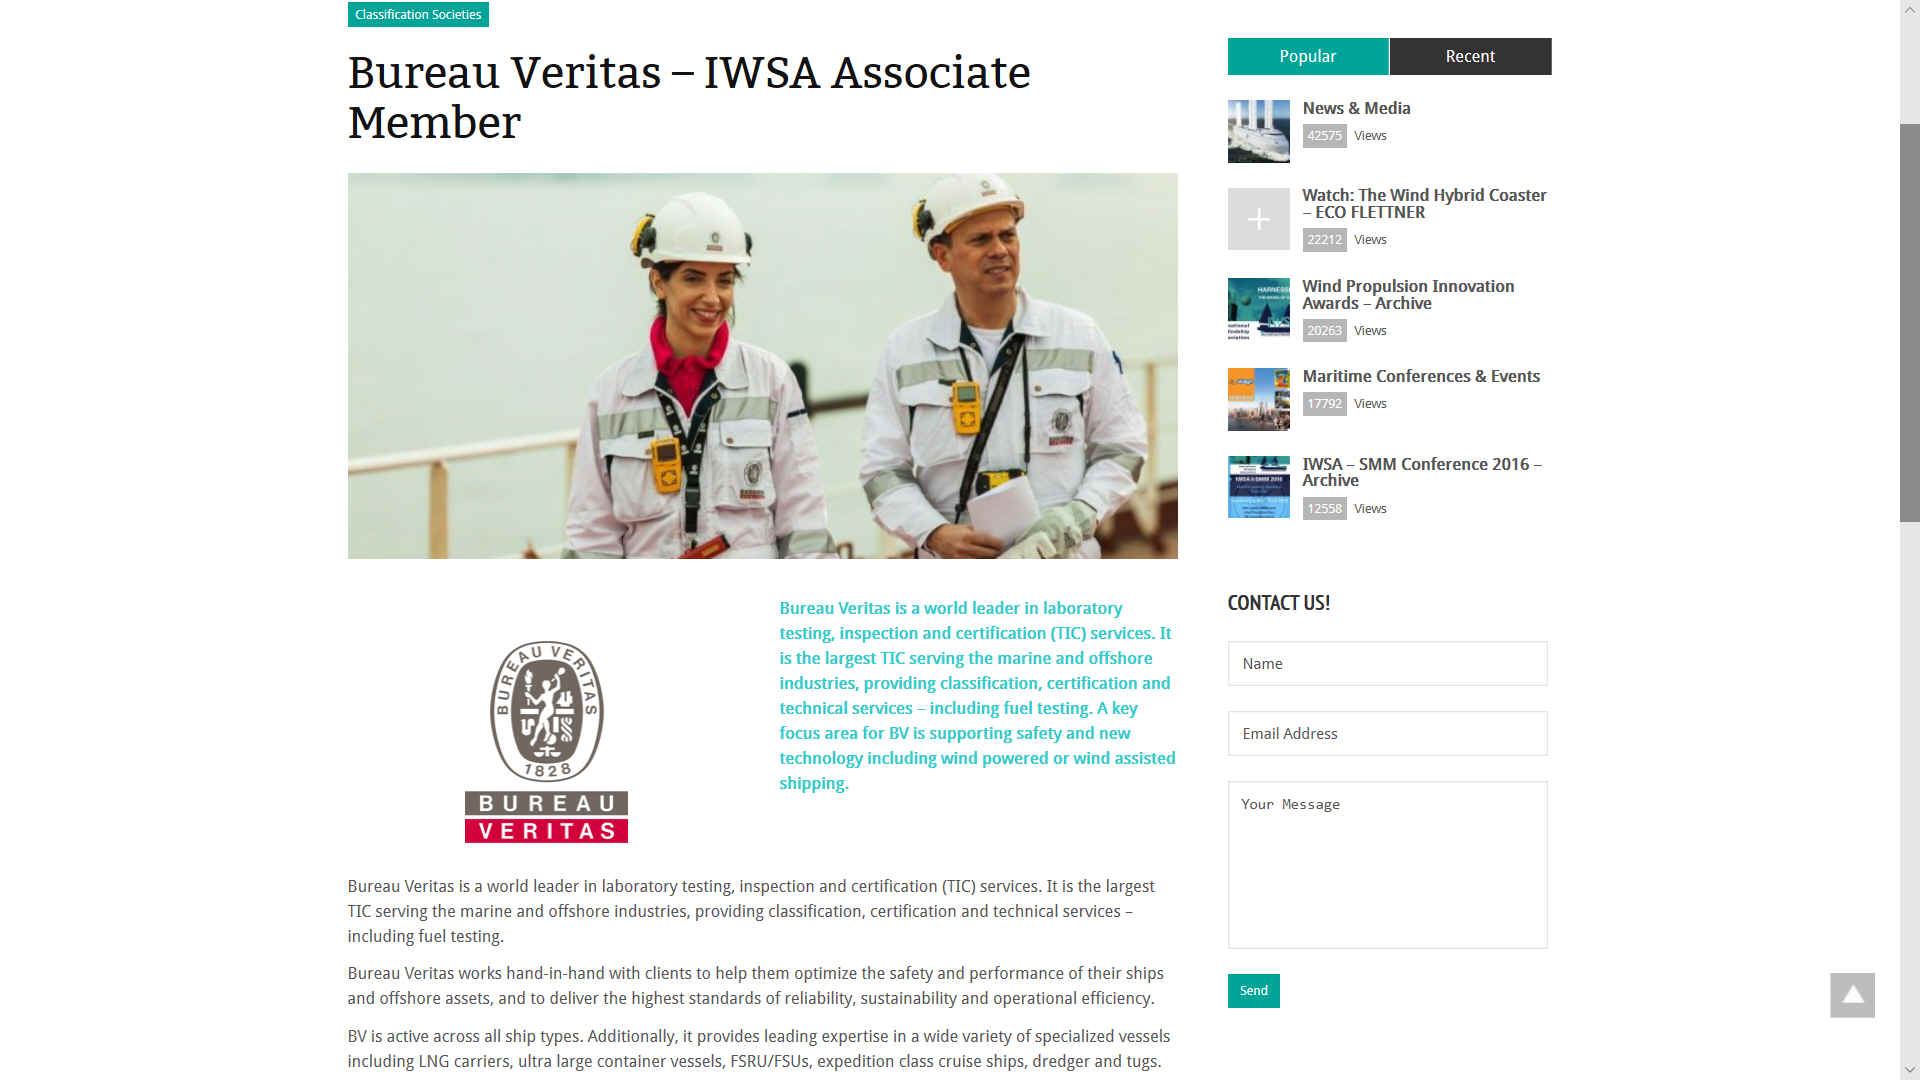 Bureau Veritas is a French classification society